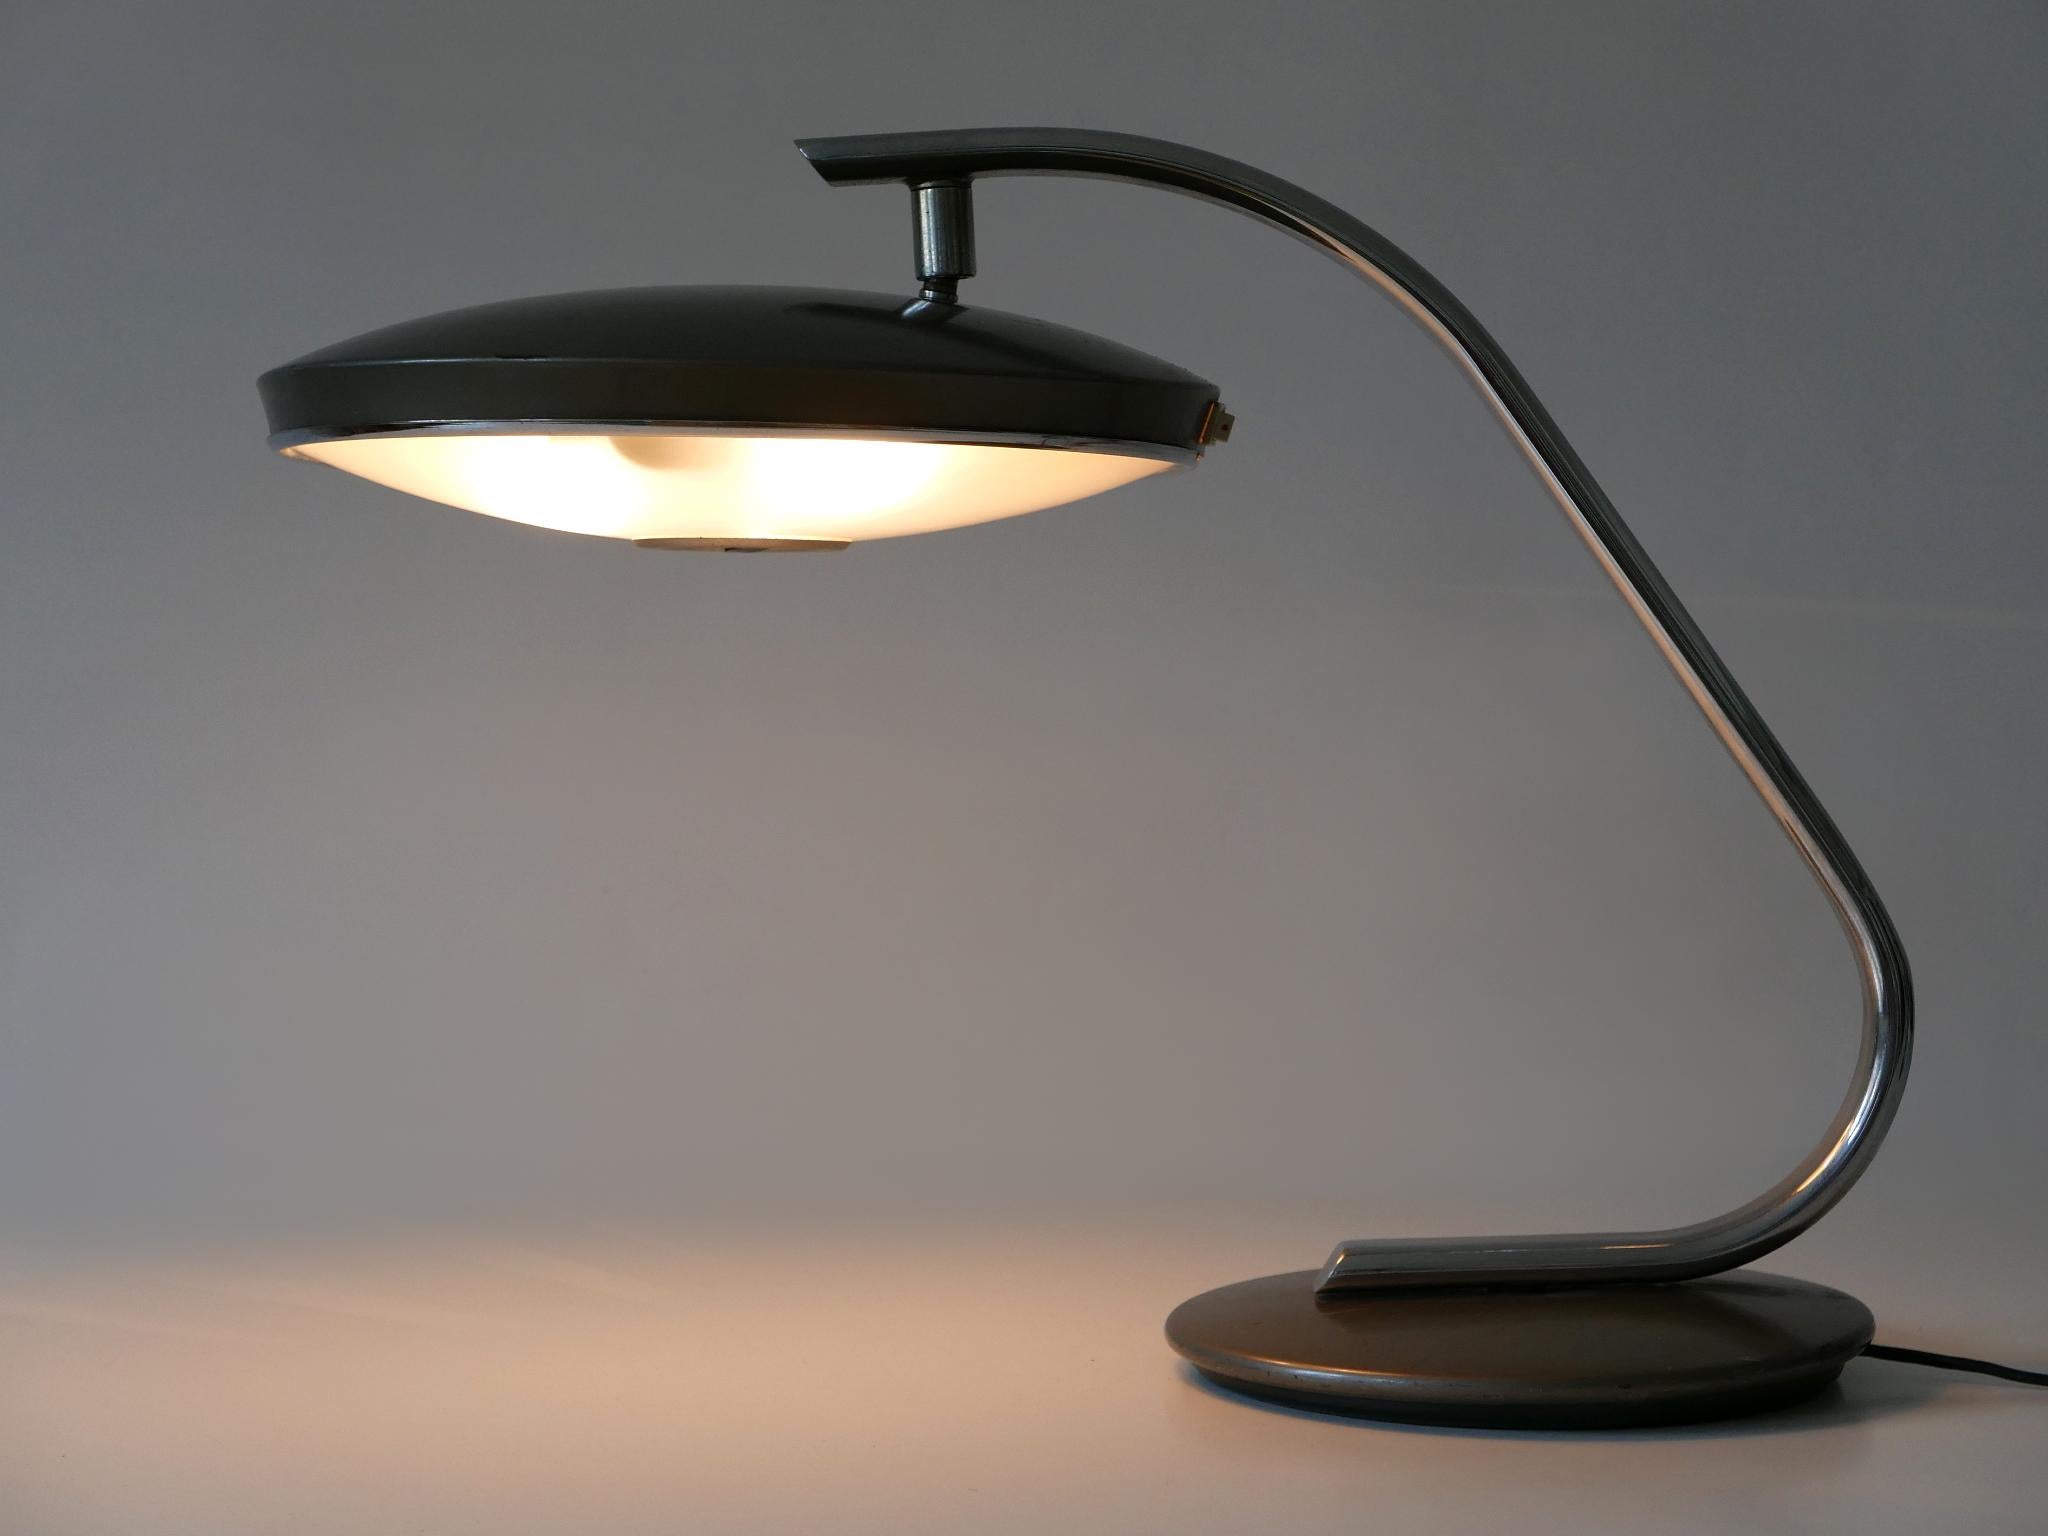 Spanish Mid Century Modern Desk Light or Table Lamp 'Boomerang' by Fase Spain 1960s For Sale